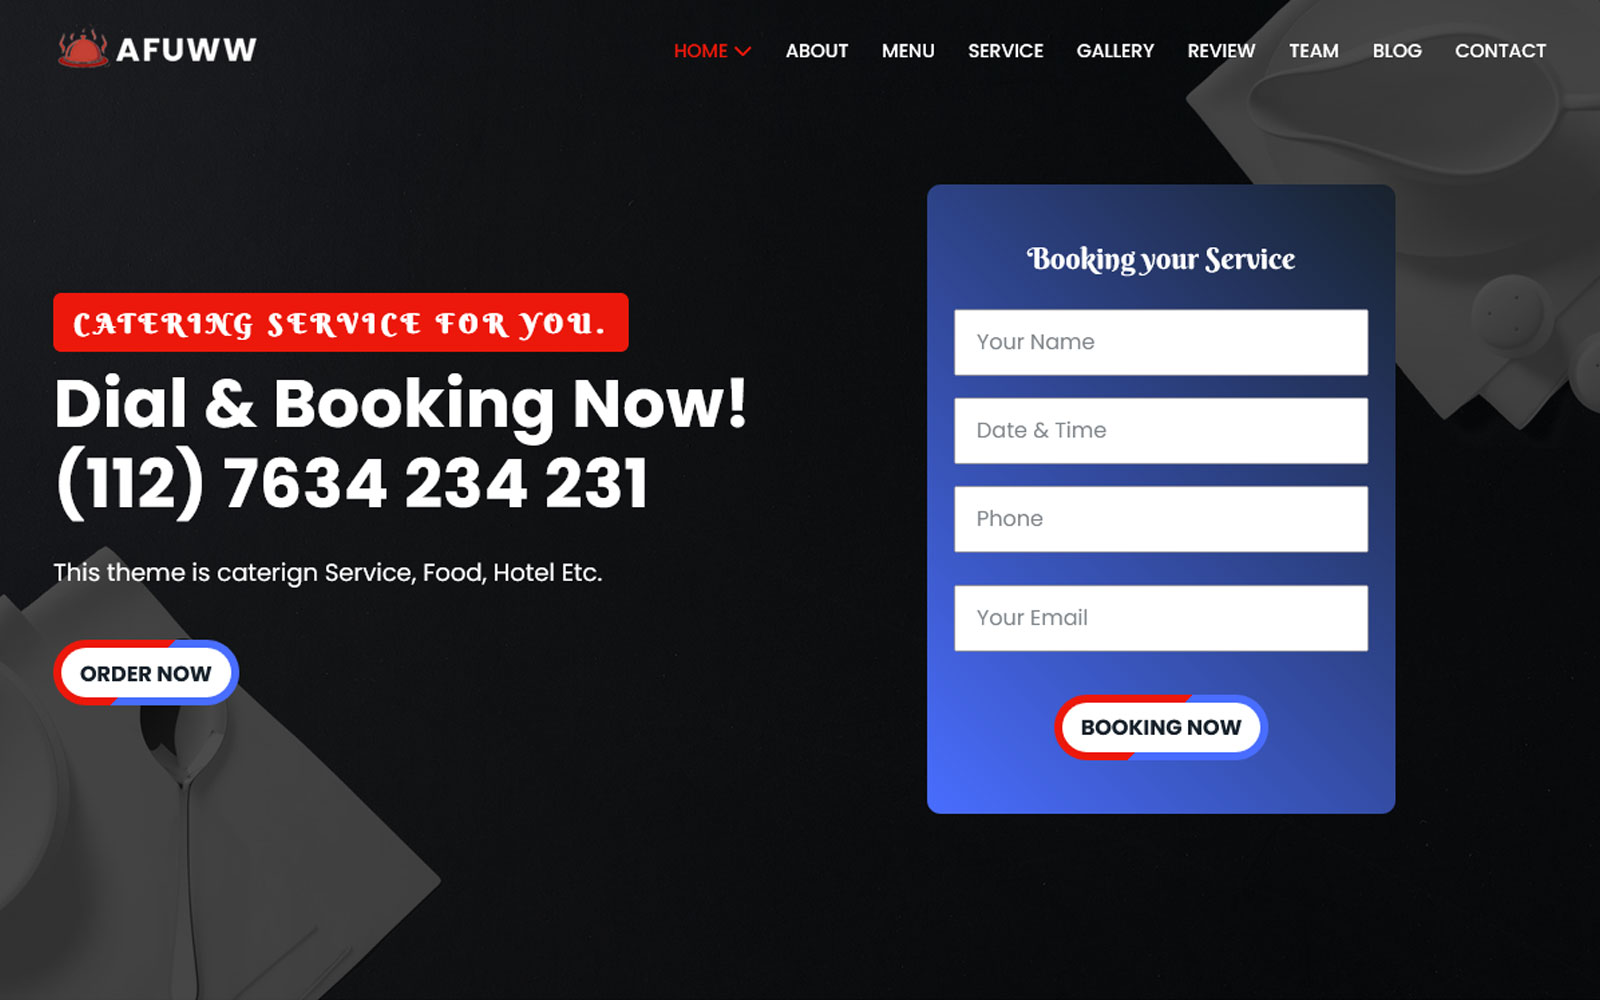 Affuww - Restaurant & Catering Service Landing Page Template